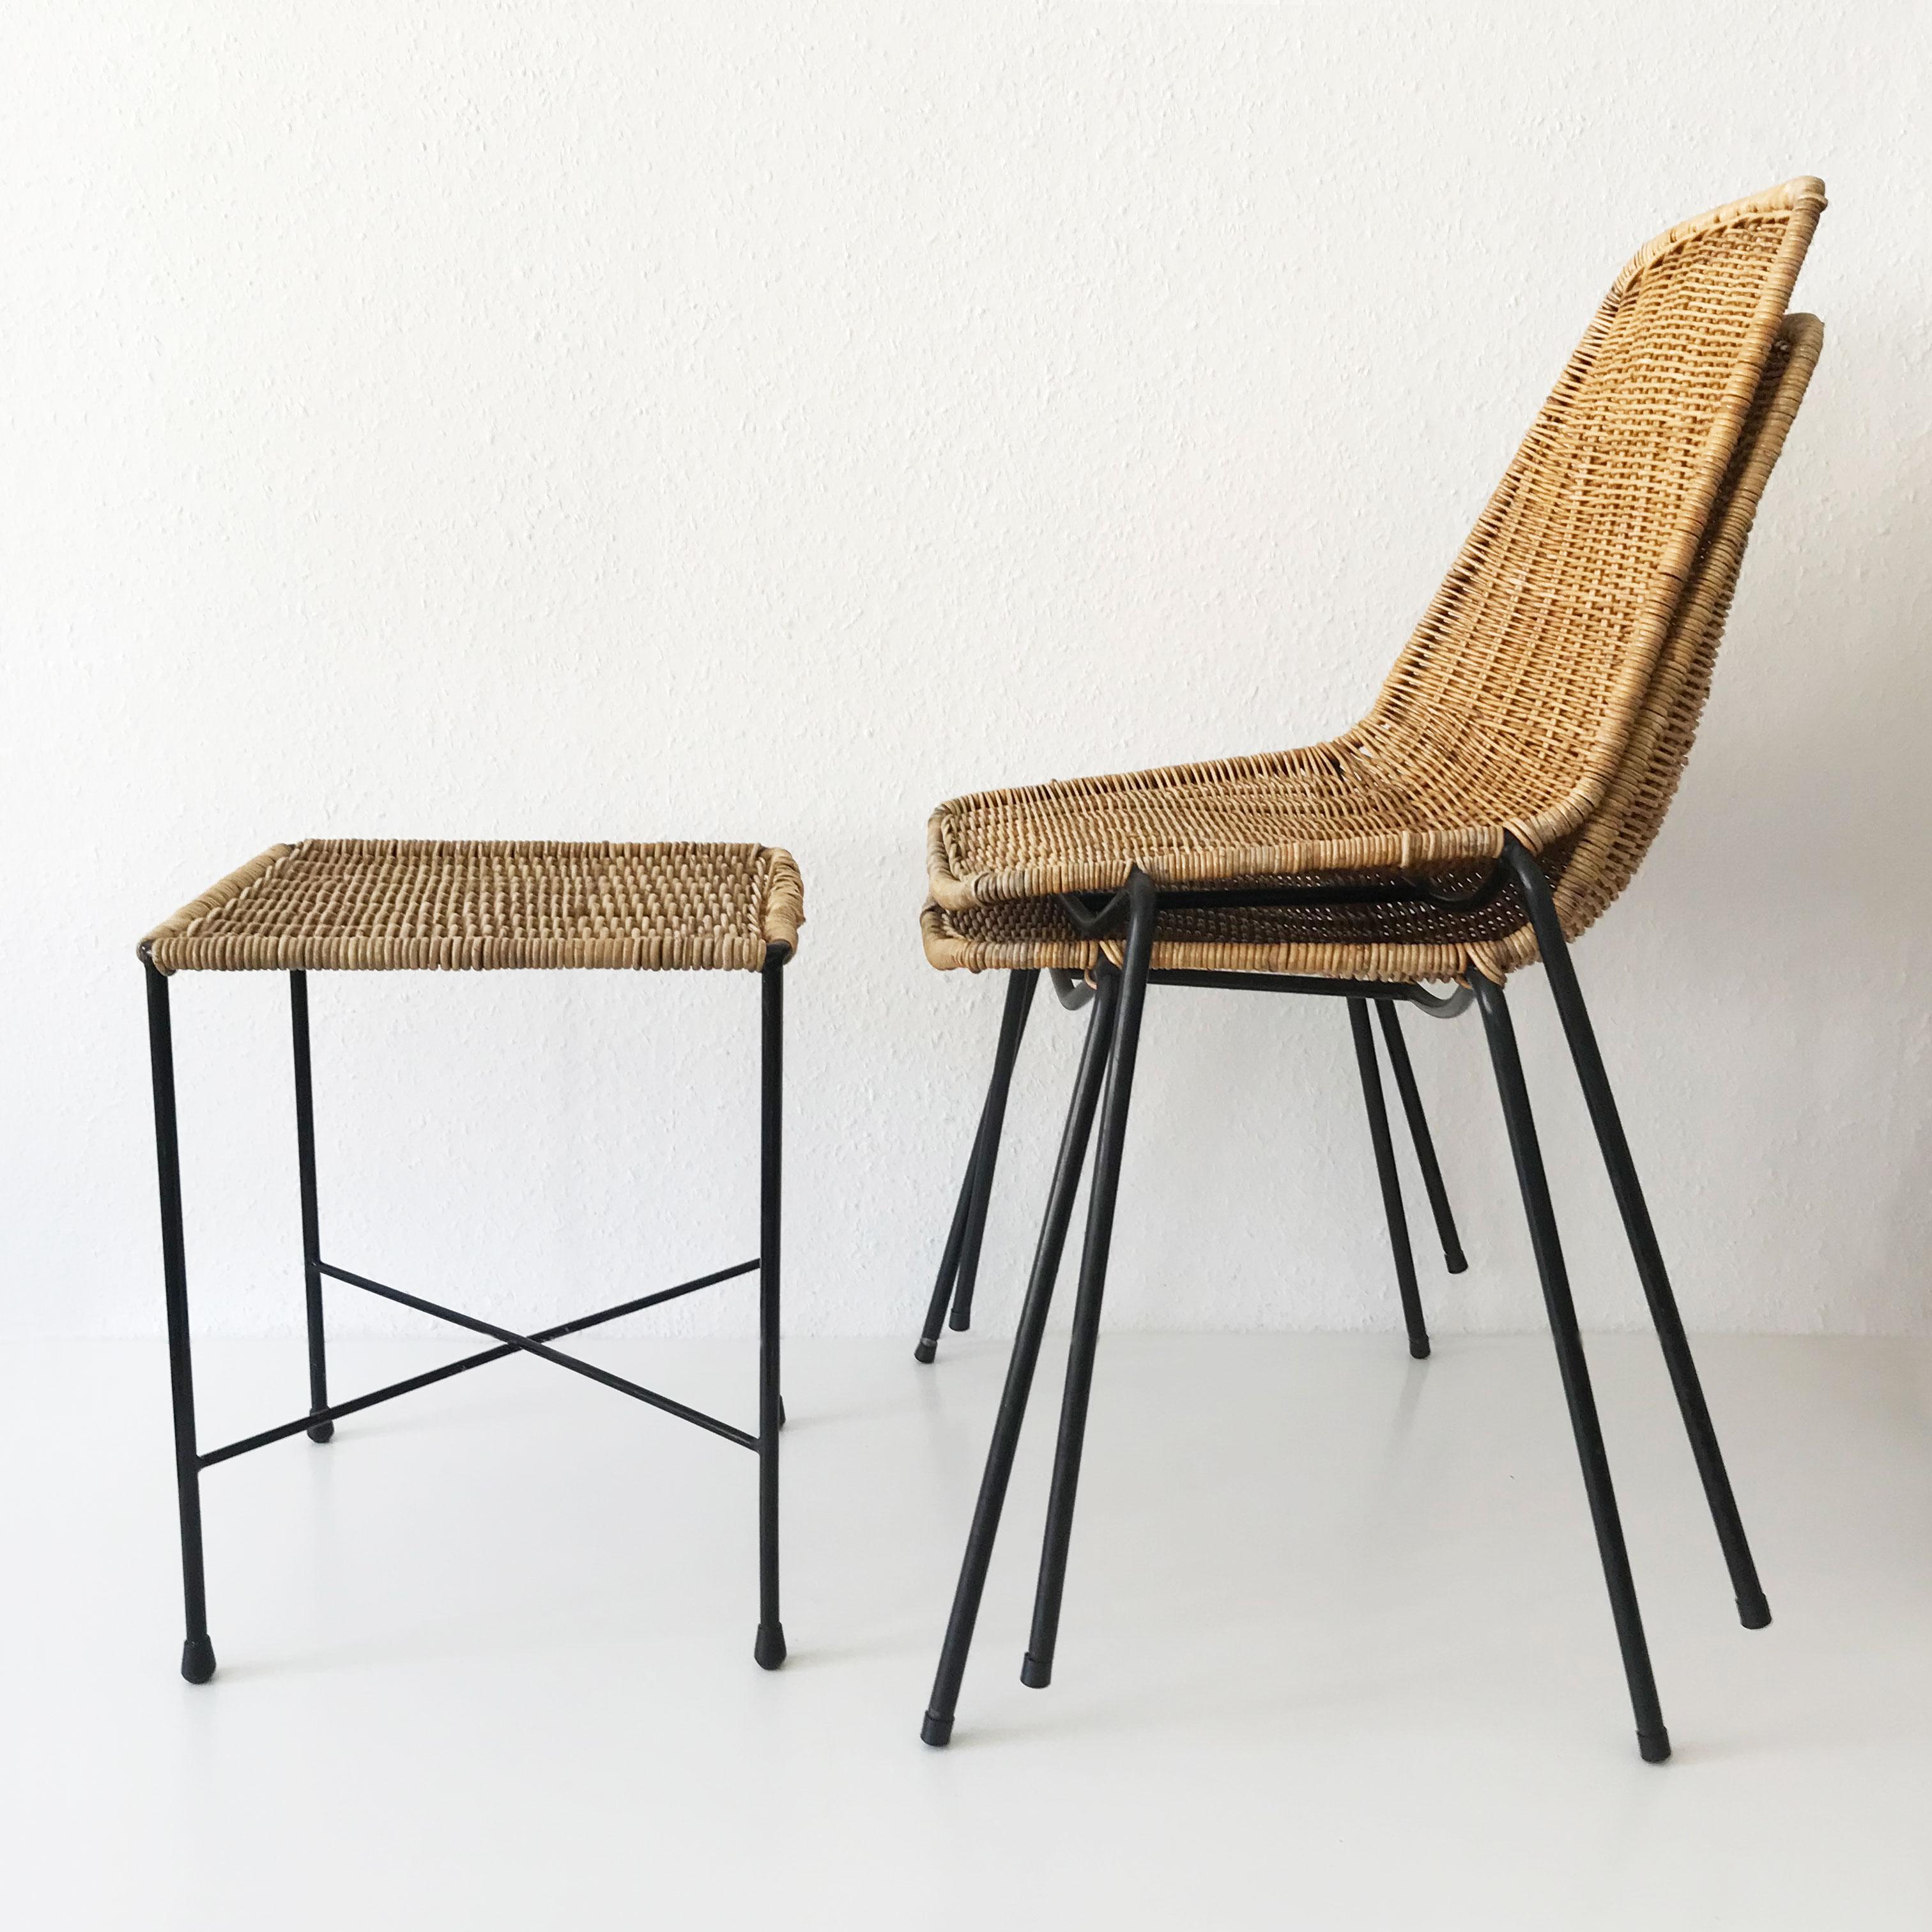 Set of two original Mid-Century Modern basket chairs and one extremely rare stool or side table by the Swiss designer Gian Franco Legler in 1951. Originally produced for the Italian restaurant The Basket. Probably executed by the J. Bally in